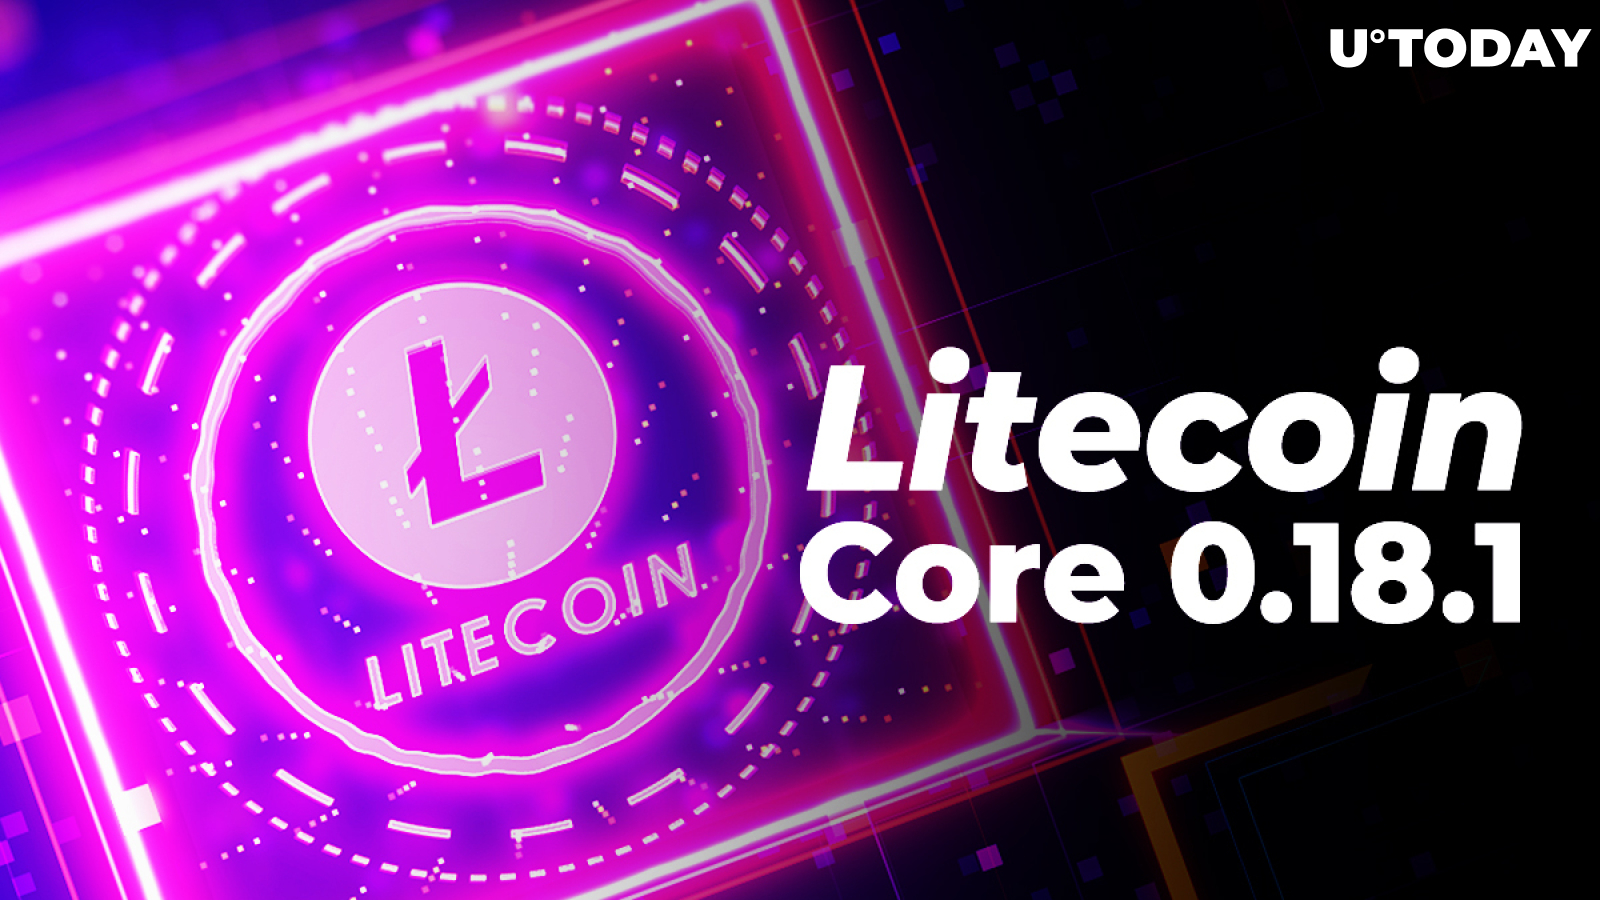 Litecoin (LTC) Core 0.18.1 Release Candidate Published. Here’s What’s New